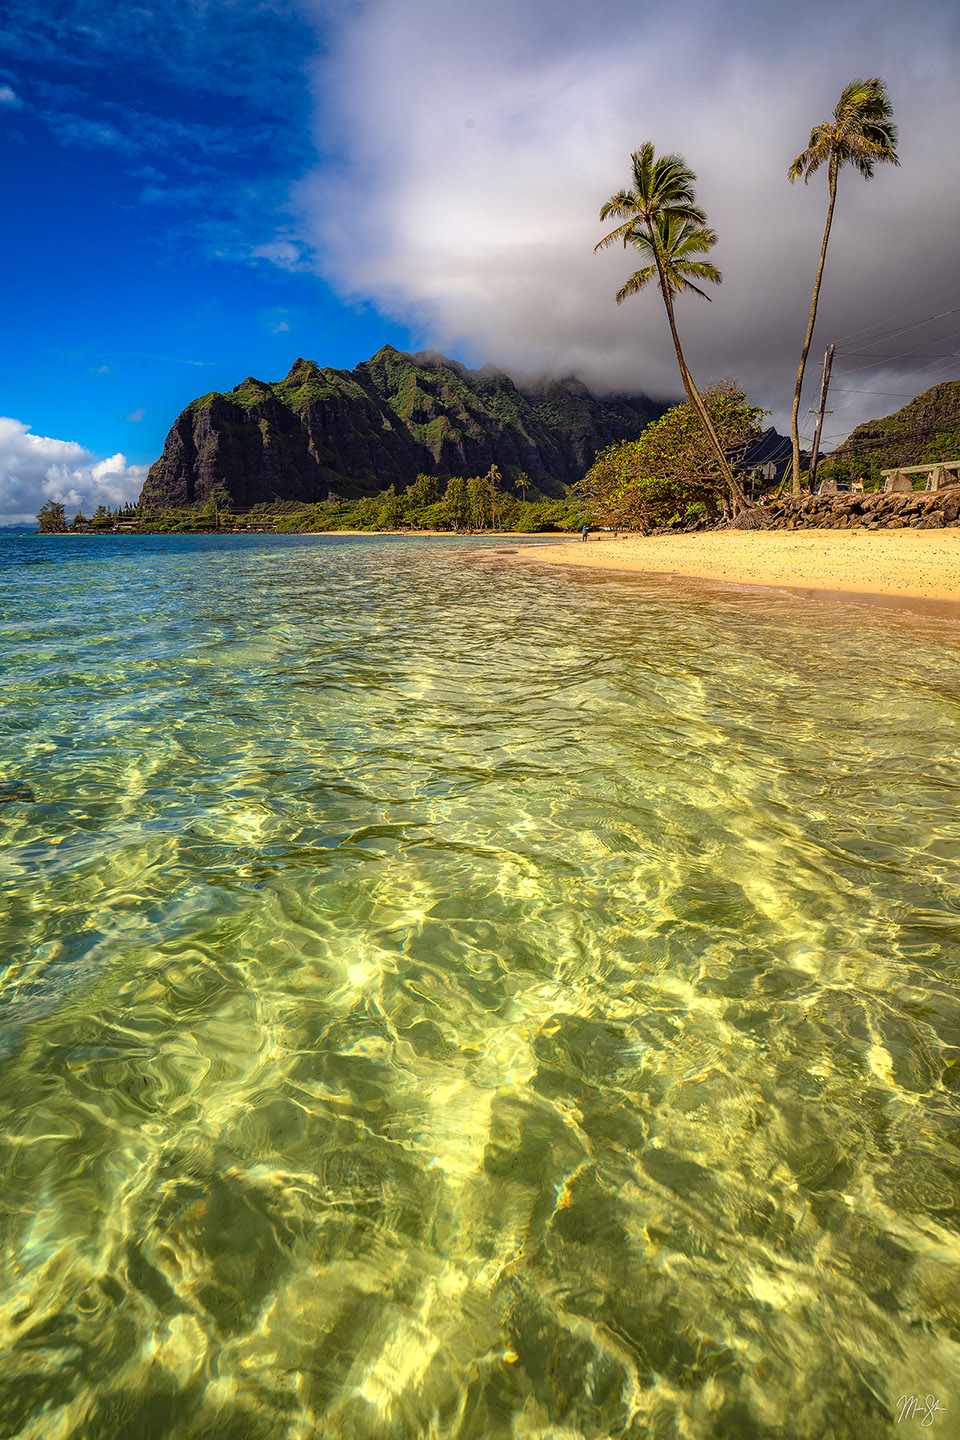 Having waded out into the water during low tide, the calm water of this windward side of Oahu at Kaaawa Beach created a relaxing scene at the beach. The famous mountains of Kualoa Ranch where famous movies and TV shows such as Jurassic Park and Jurassic World were filmed can be seen in the background. Also available in traditional landscape format.